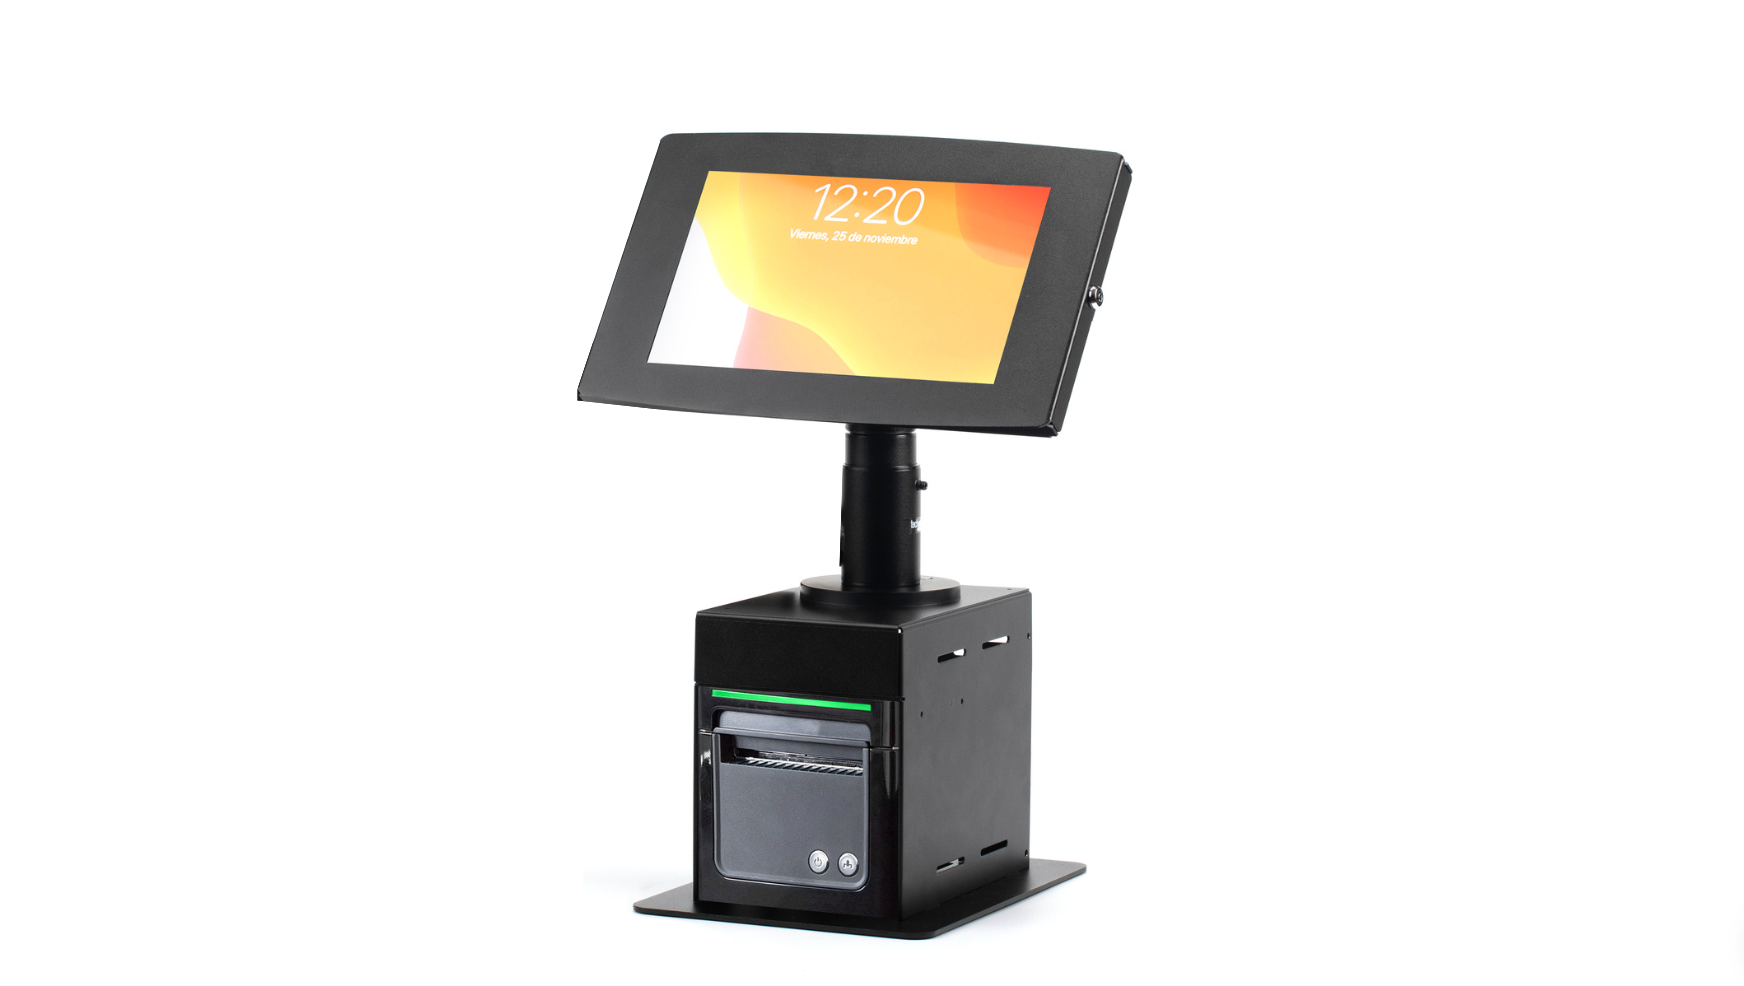 Queue Management and Check-in Compact Kiosk with Lockable Tablet Frame and Printer Metal Box